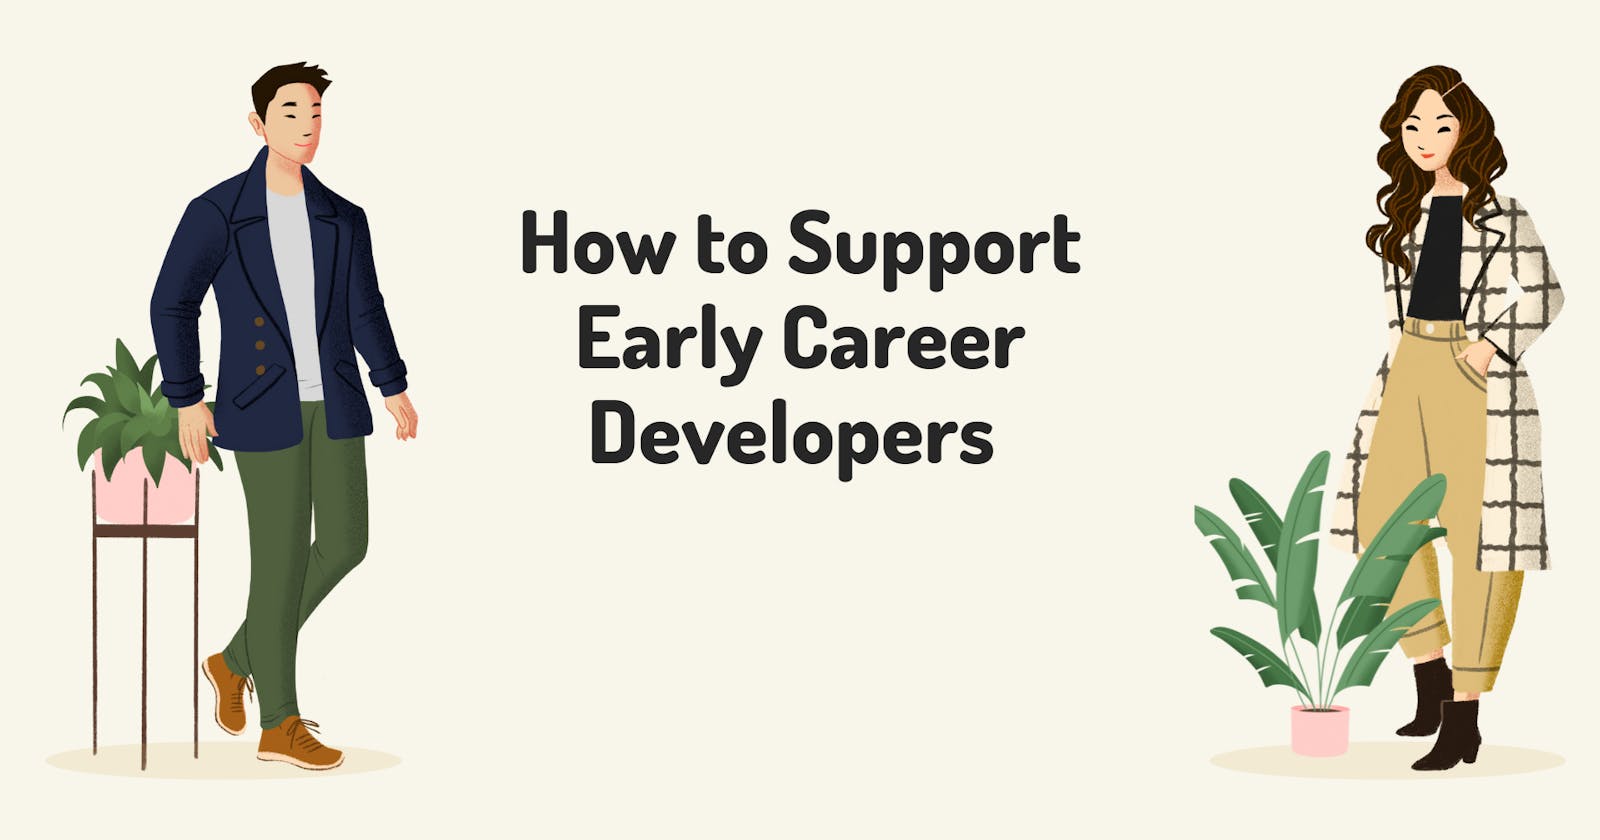 How to Support Early Career Developers